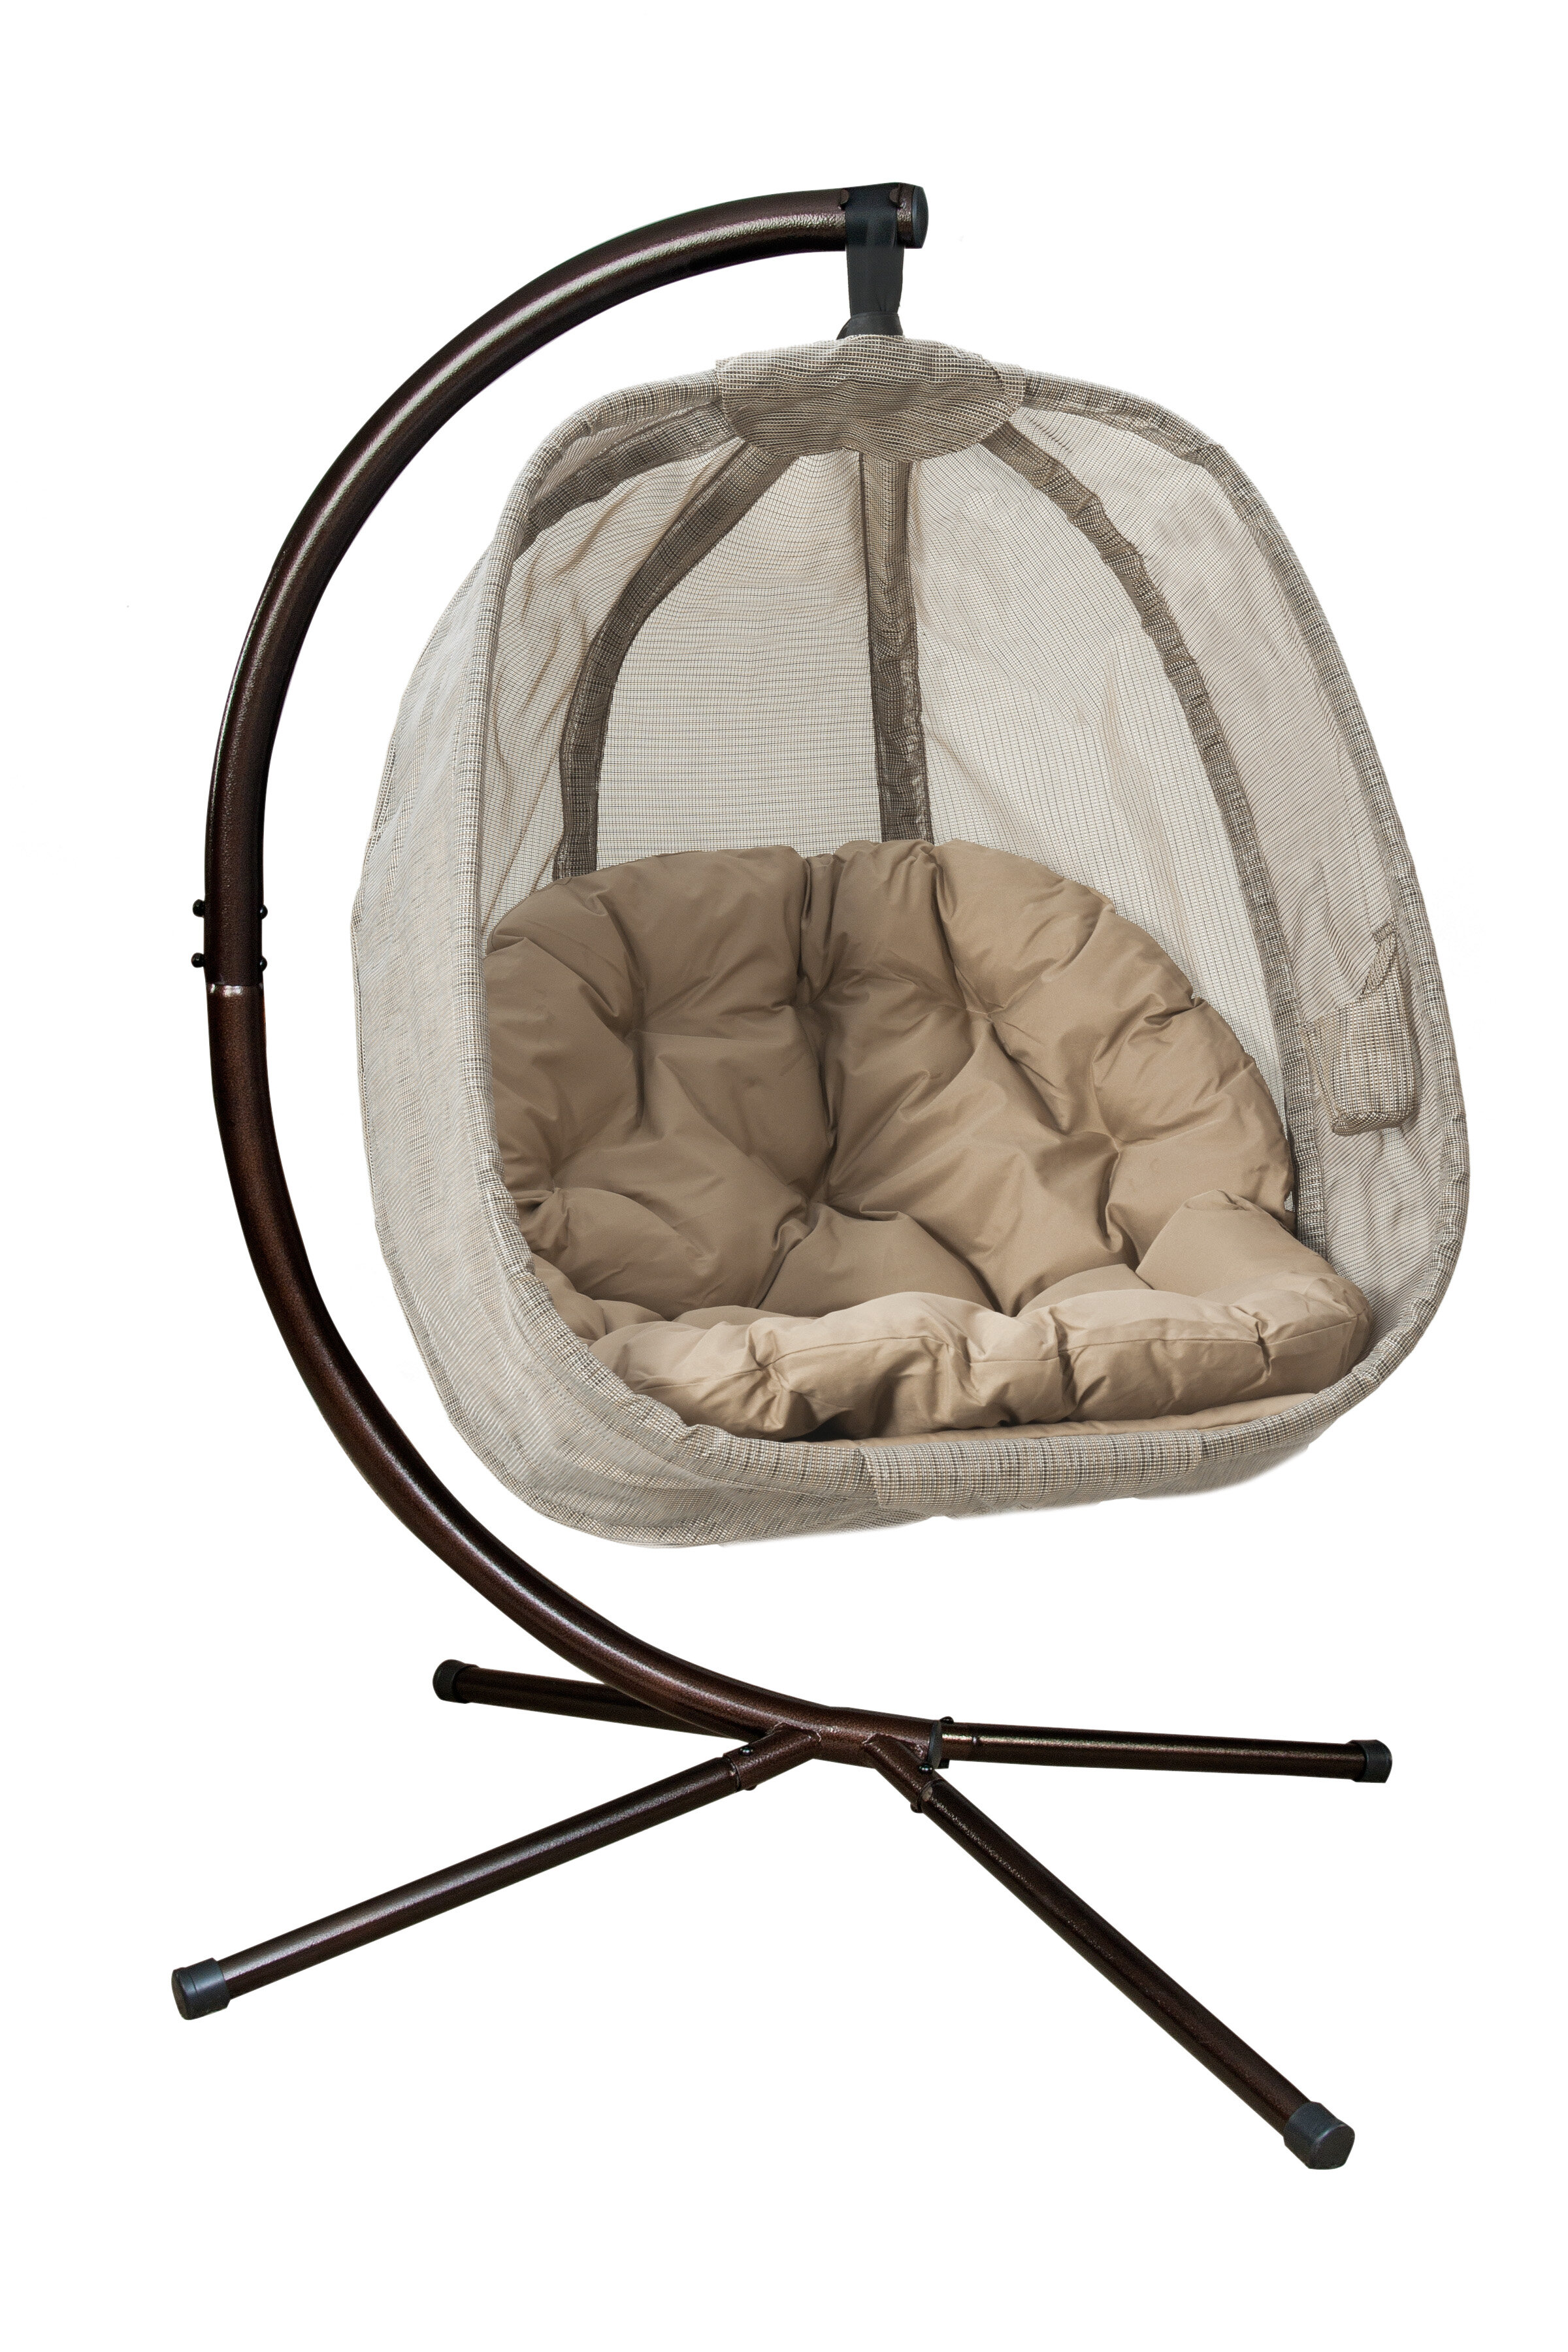 Flowerhouse Egg Swing Chair With Stand Reviews Wayfair